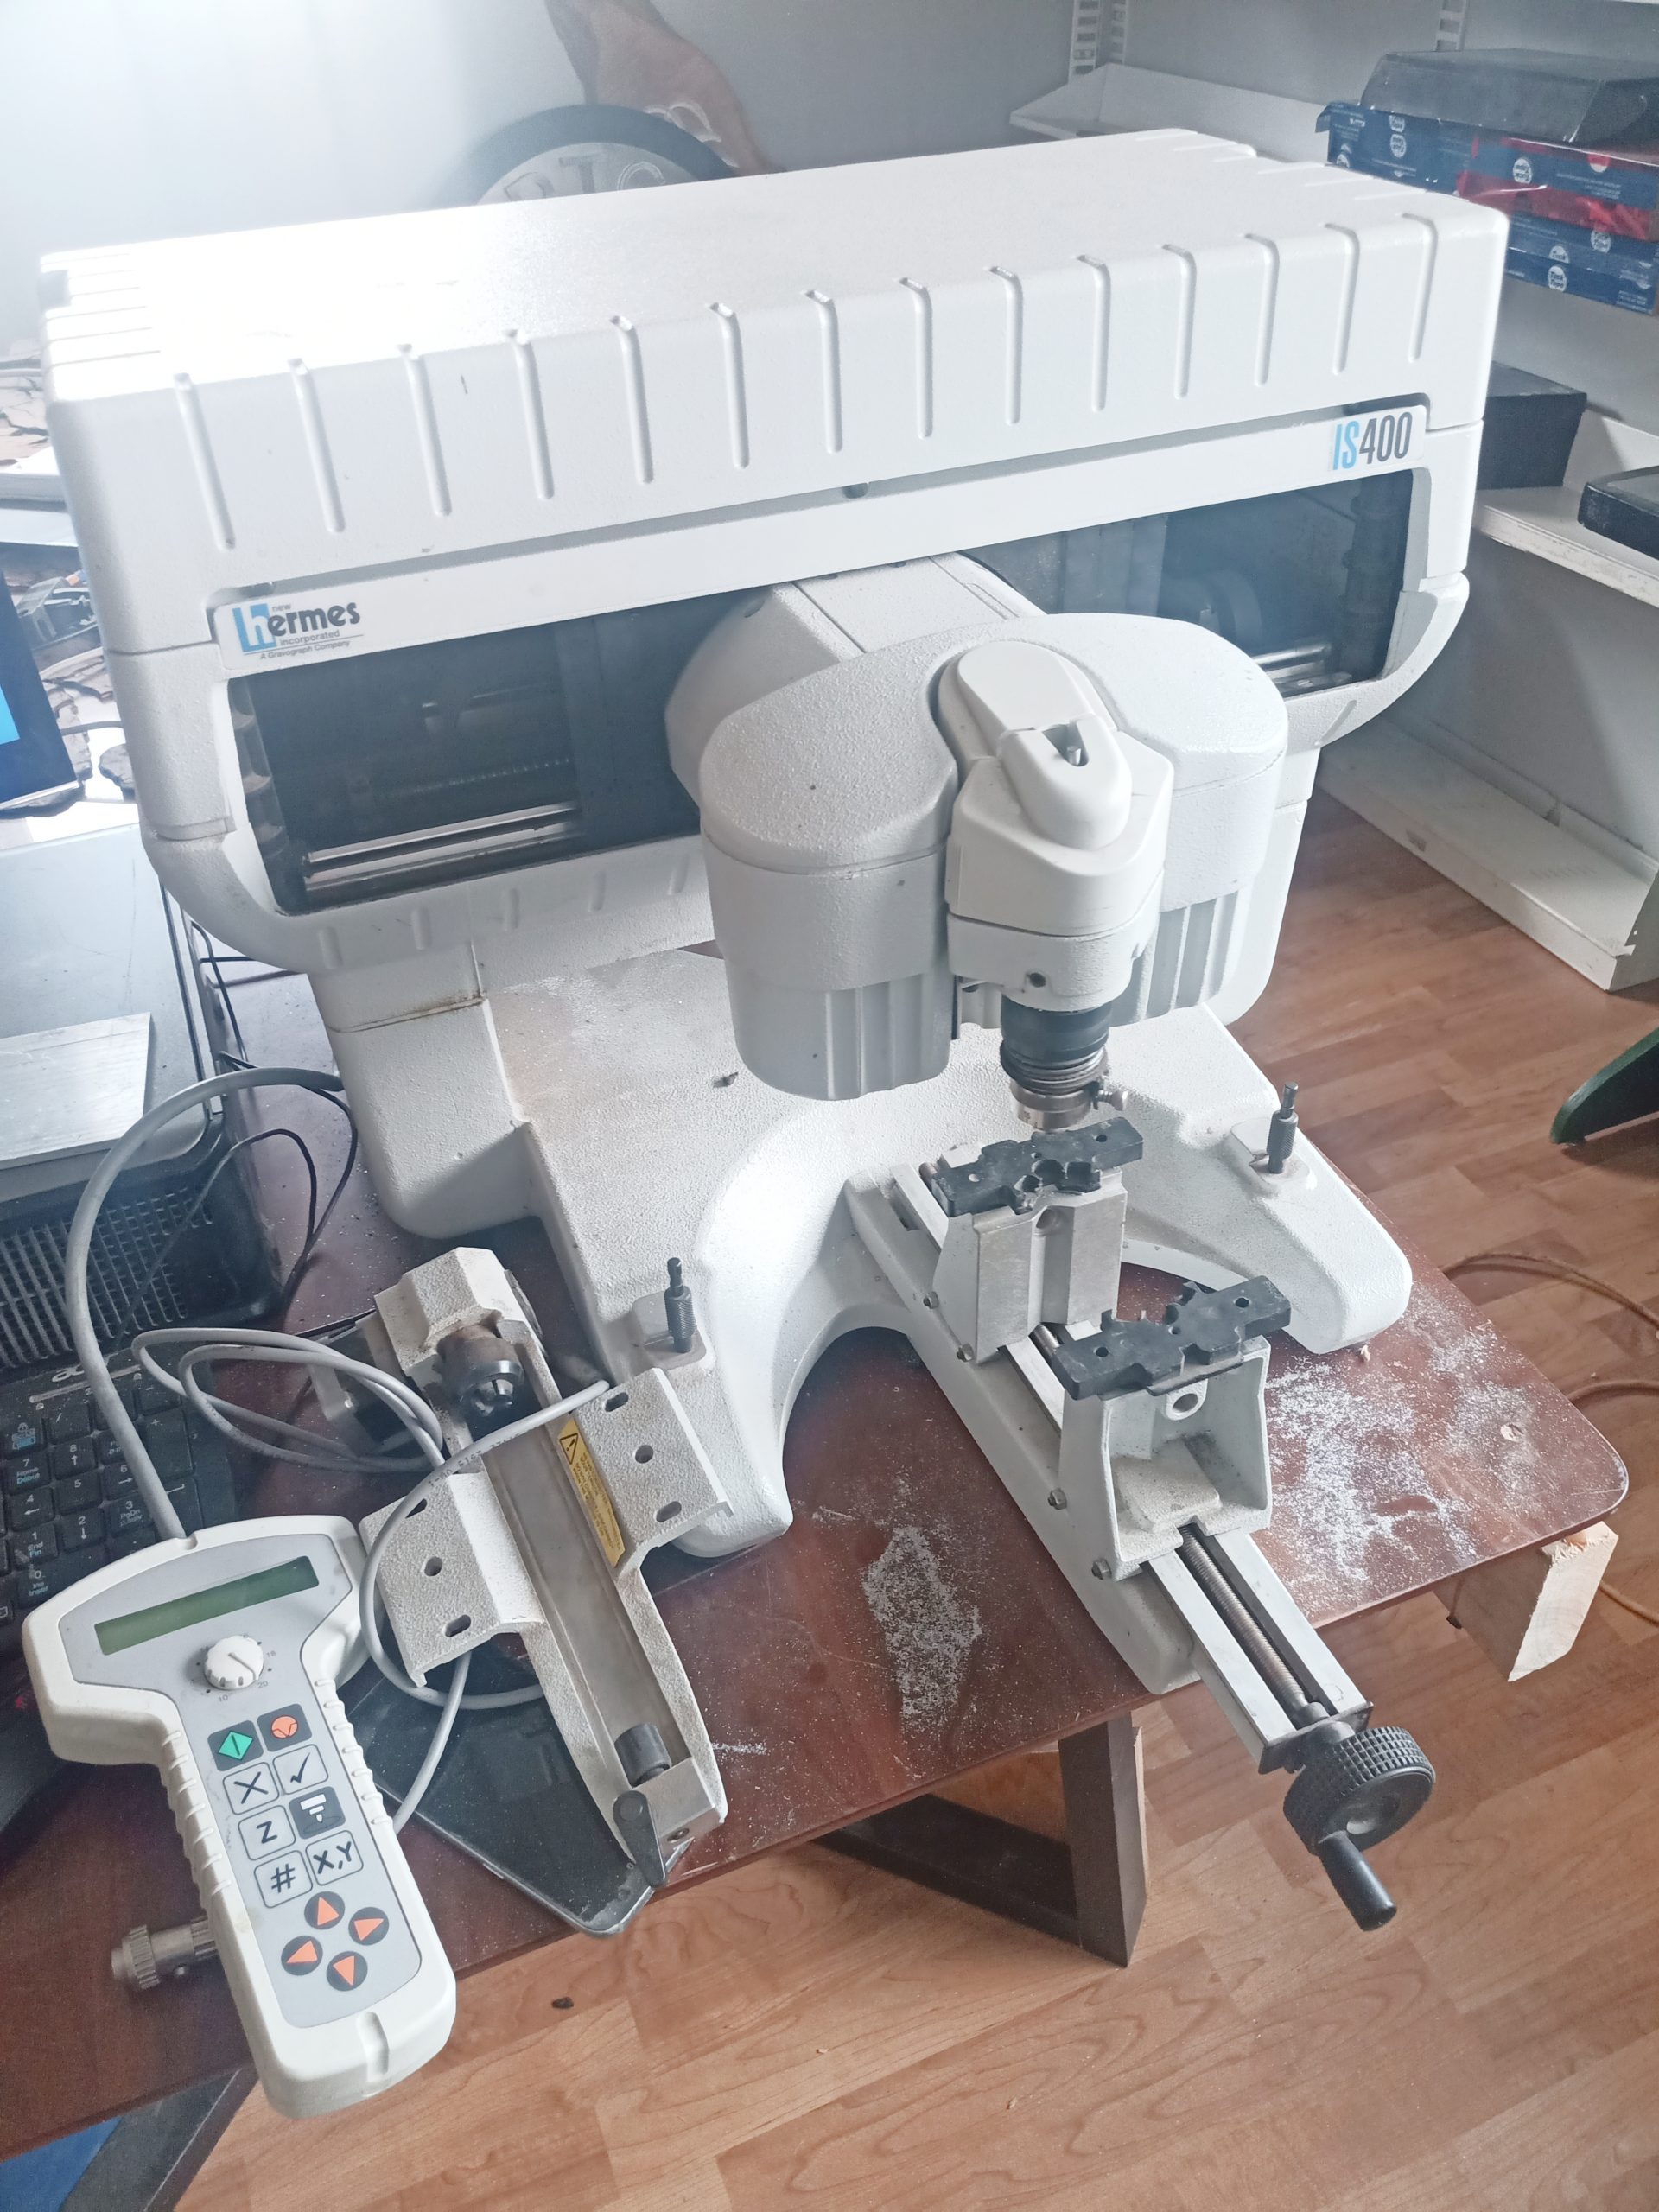 Gravograph / Gravotech / New Hermes IS400 Engraver IS400 Engraver (Used) Item # UE-071122A(Canada)